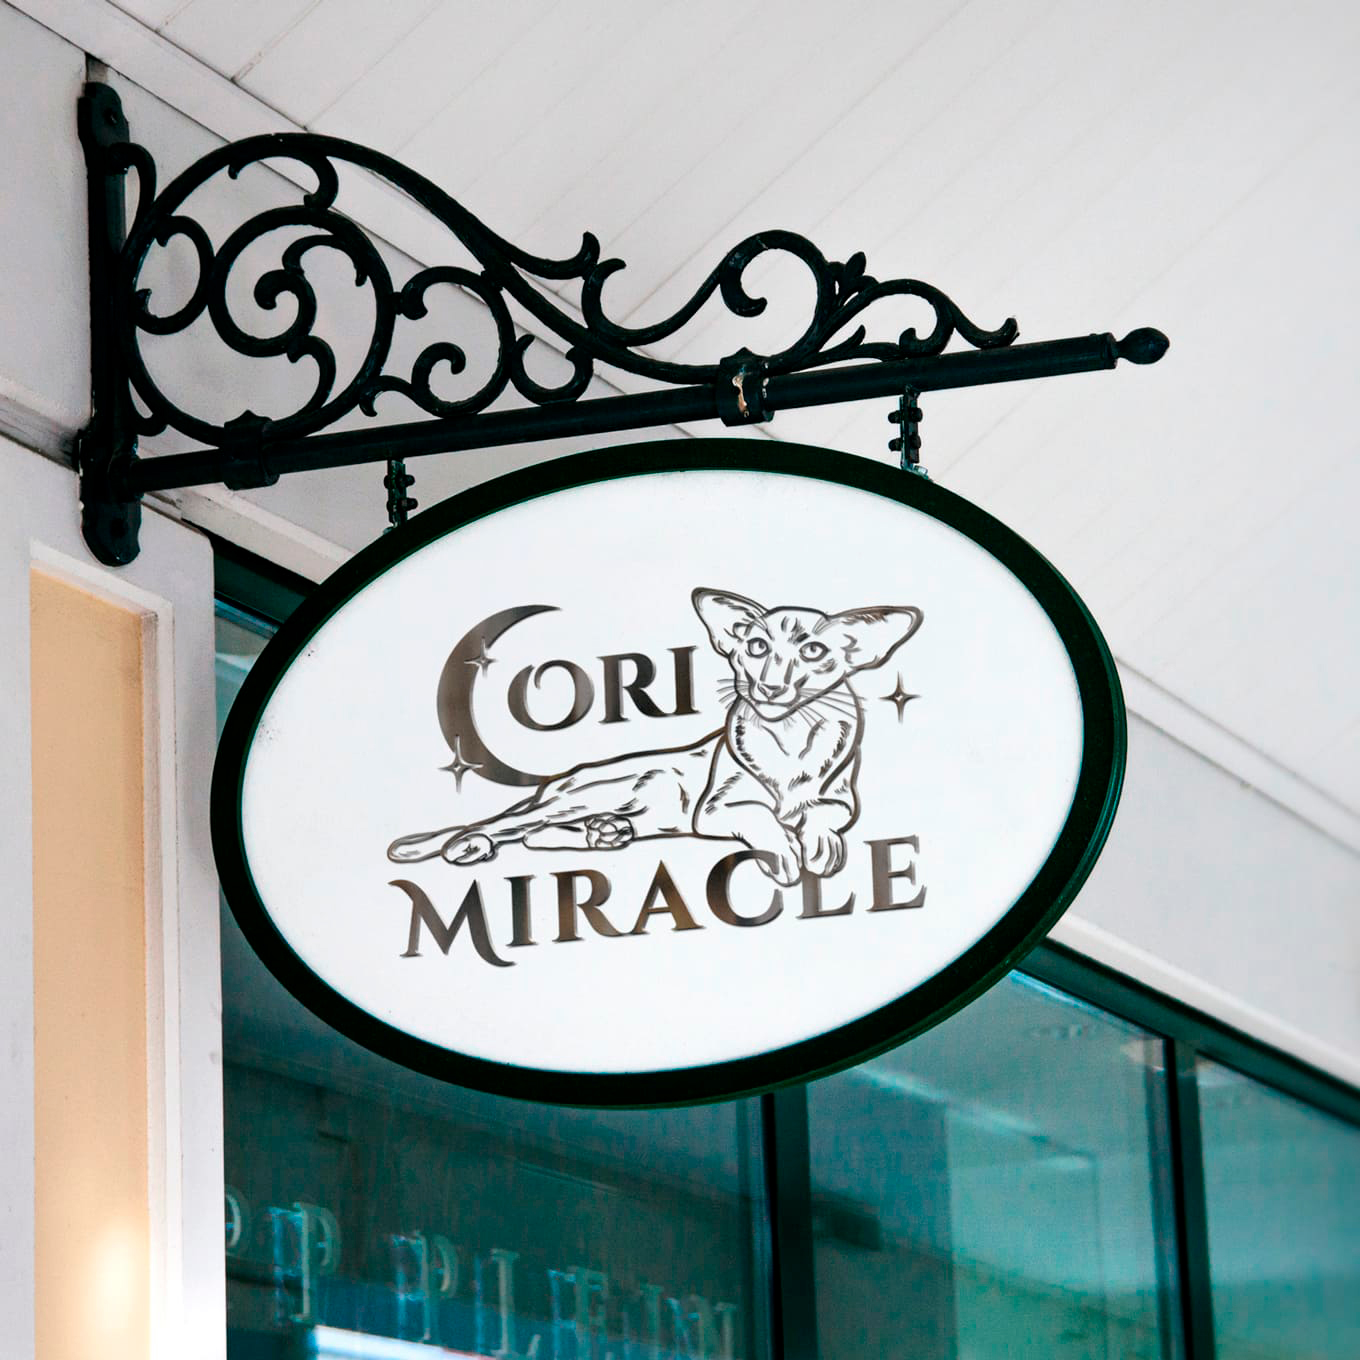 Oriental breed cattery logo "Ori Miracle"